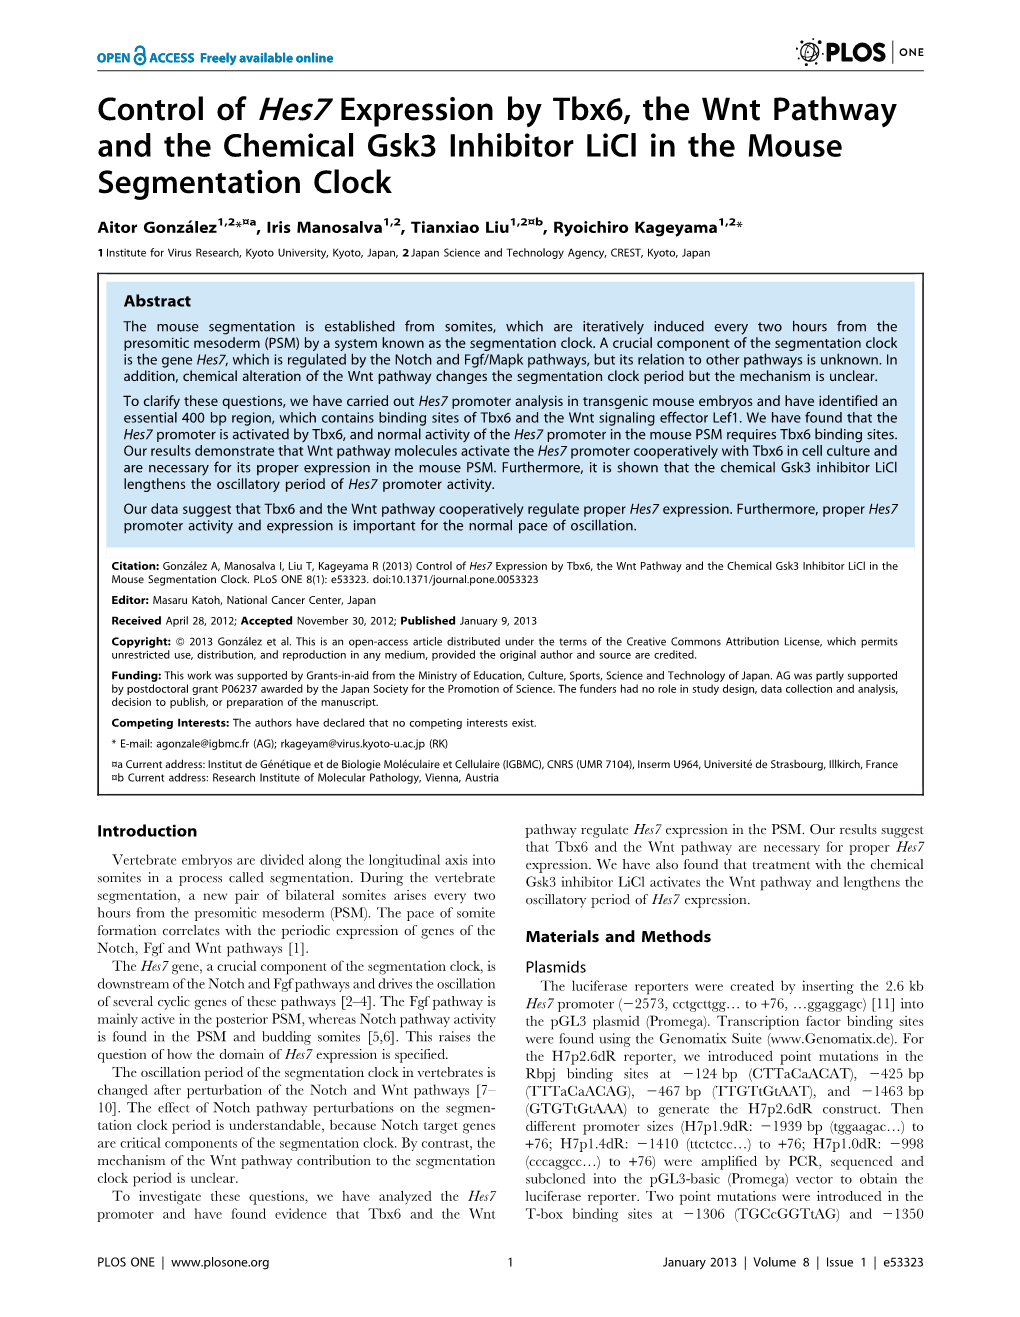 Control of Hes7 Expression by Tbx6, the Wnt Pathway and the Chemical Gsk3 Inhibitor Licl in the Mouse Segmentation Clock